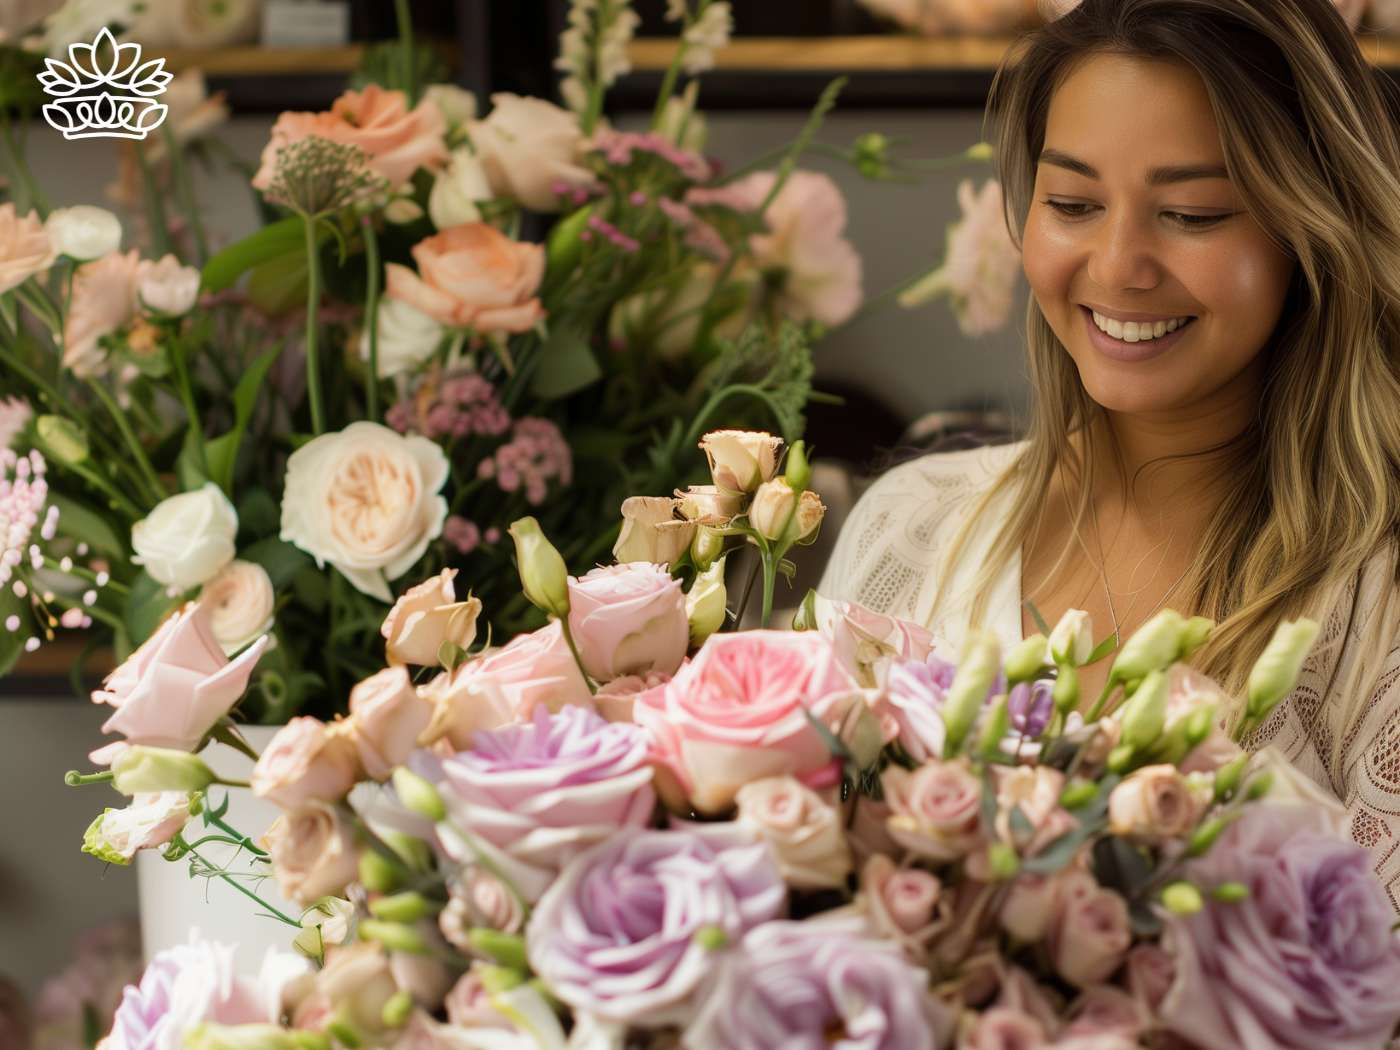 A delighted woman with a radiant smile appreciating a graceful congratulations gift bouquet of blush roses and lilac flowers, reflecting skilled floral craftsmanship in a serene setting—Fabulous Flowers and Gifts same day delivery